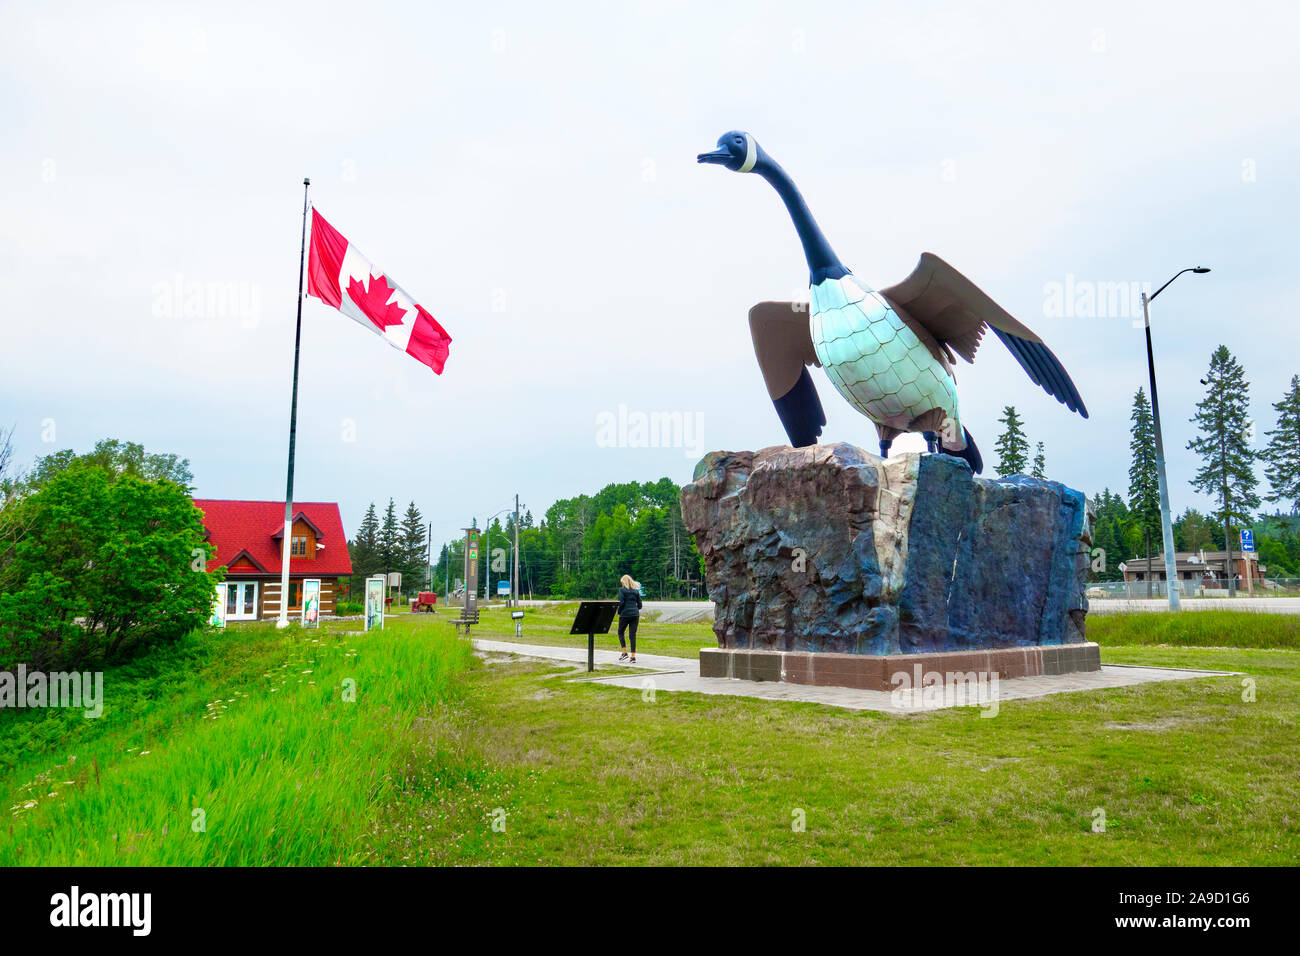 Wawa Goose in Goulais River, Ontario: This giant roadside goose has been hailing travelers into a small Ontario town for over 50 years Stock Photo